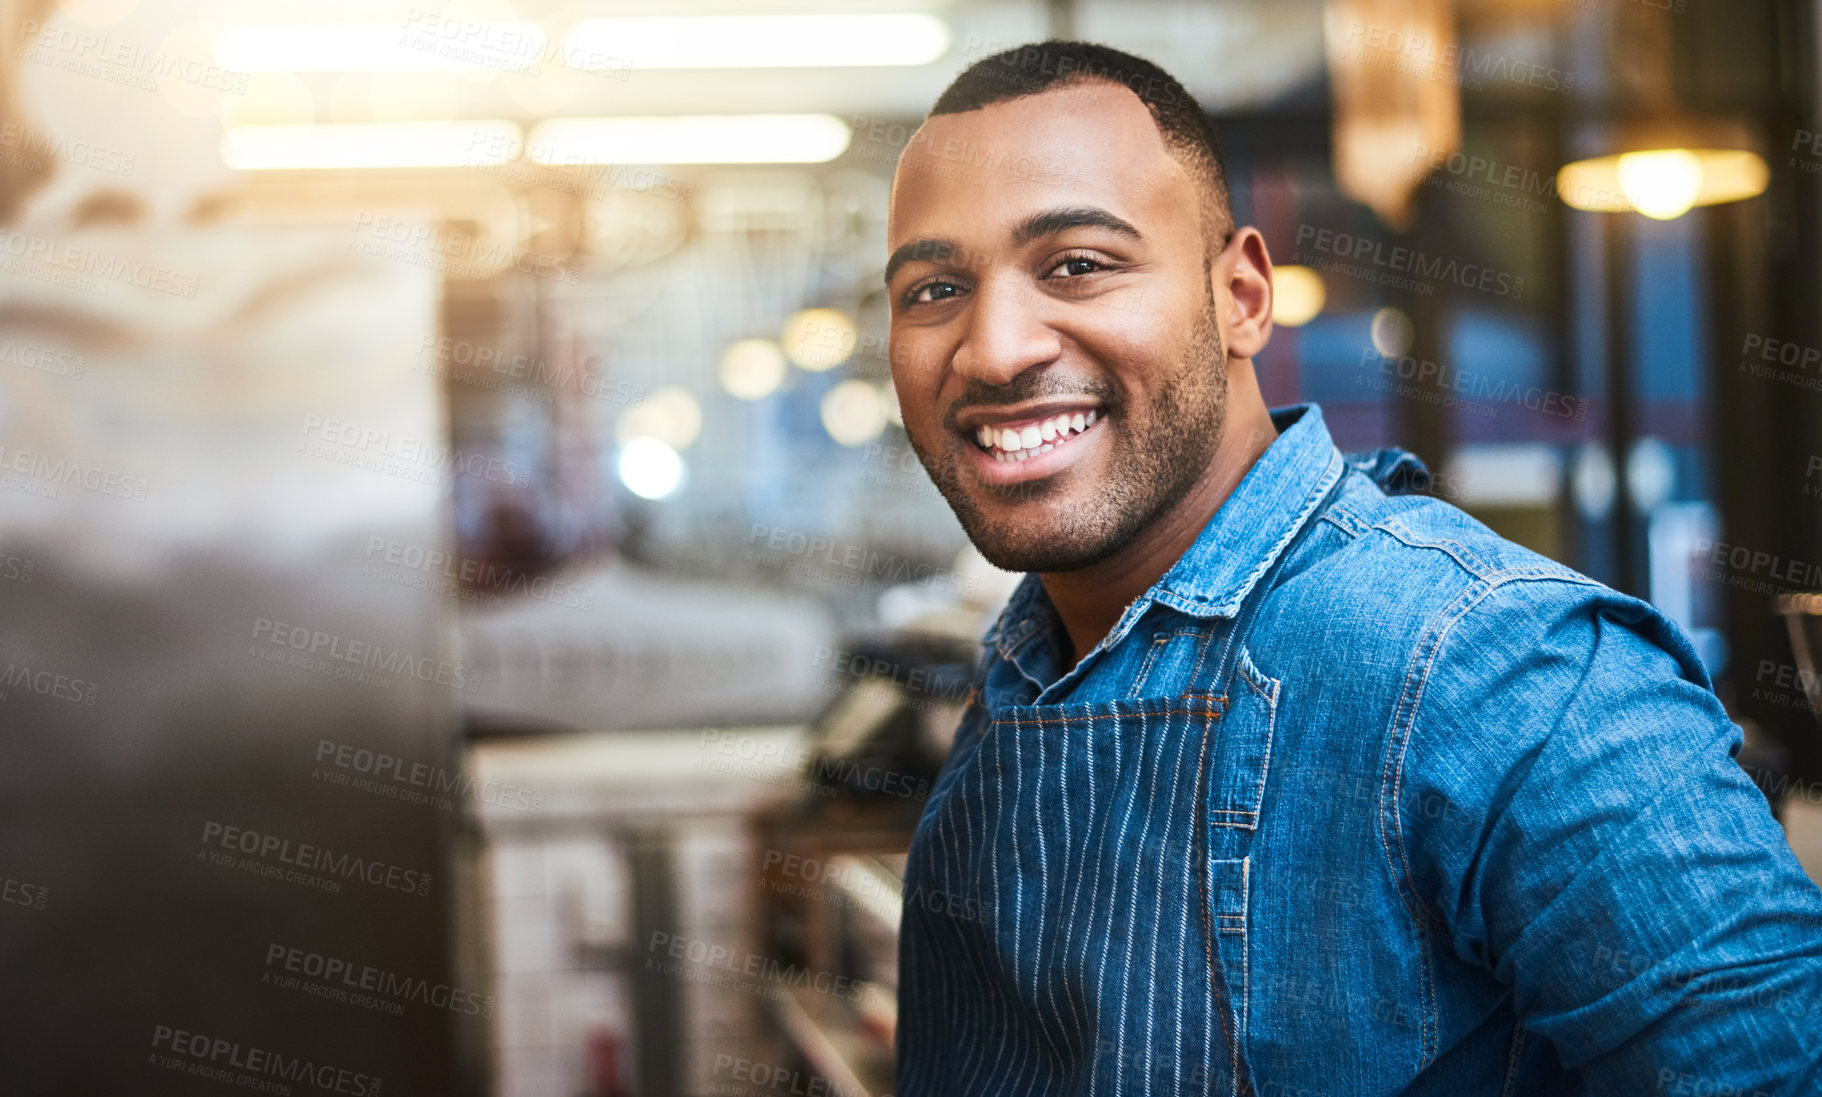 Buy stock photo Cropped portrait of a handsome young man standing in his coffee shop